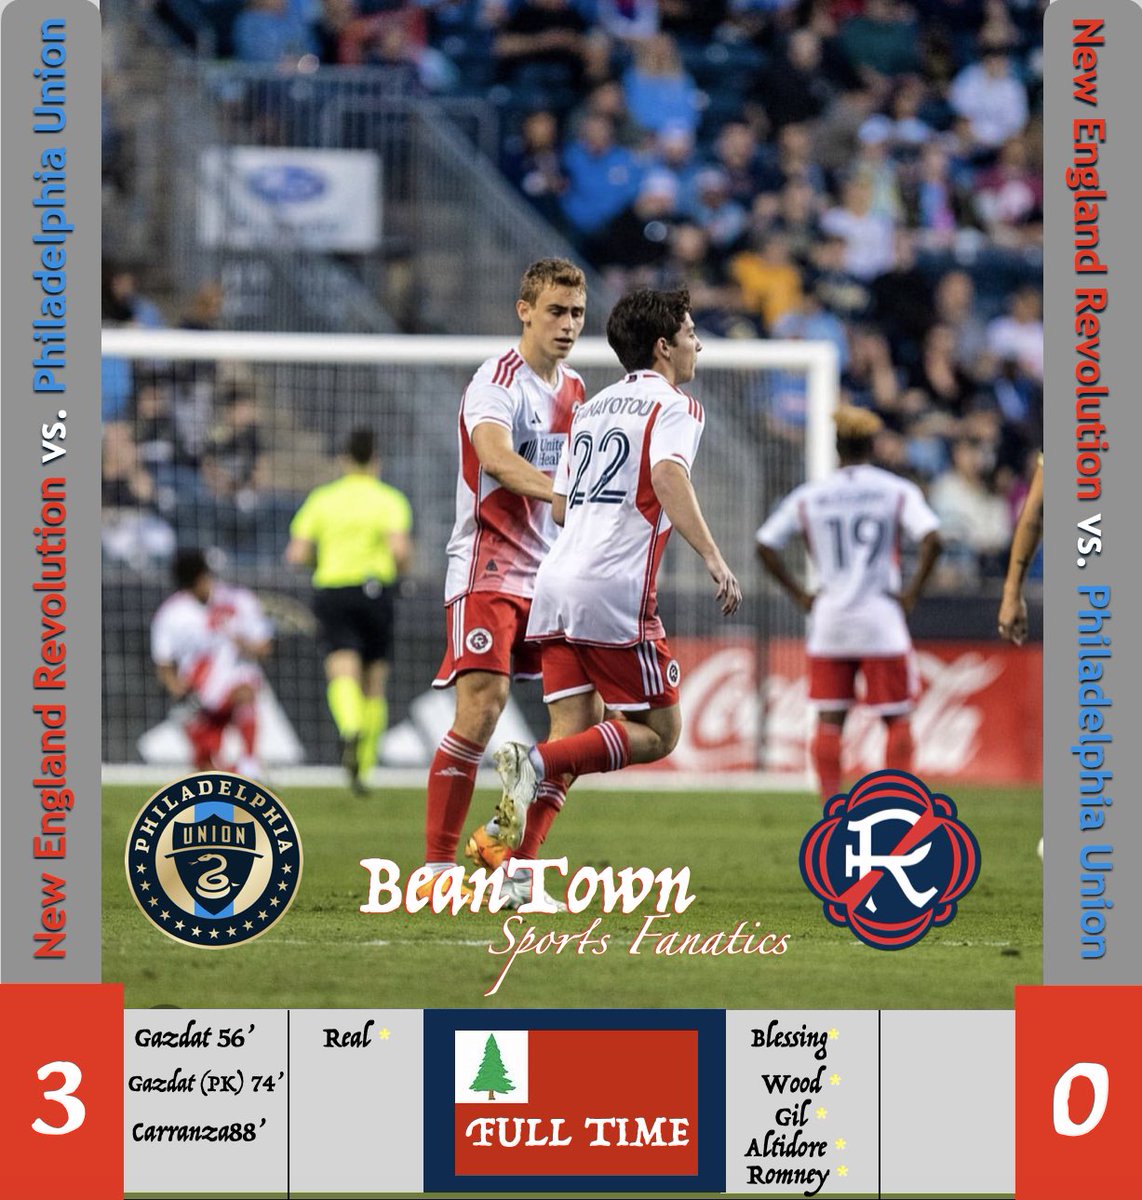 The Revs suffer there 2nd loss in a row. If the object of the game was to collect cards the Revs would have blown Philly away 5-1. #mls #majorleaguesoccer #soccer #revolutionsoccer #newenglandrevolution #nerevs #newengland #massaachusetts #beantownsportsfanatics